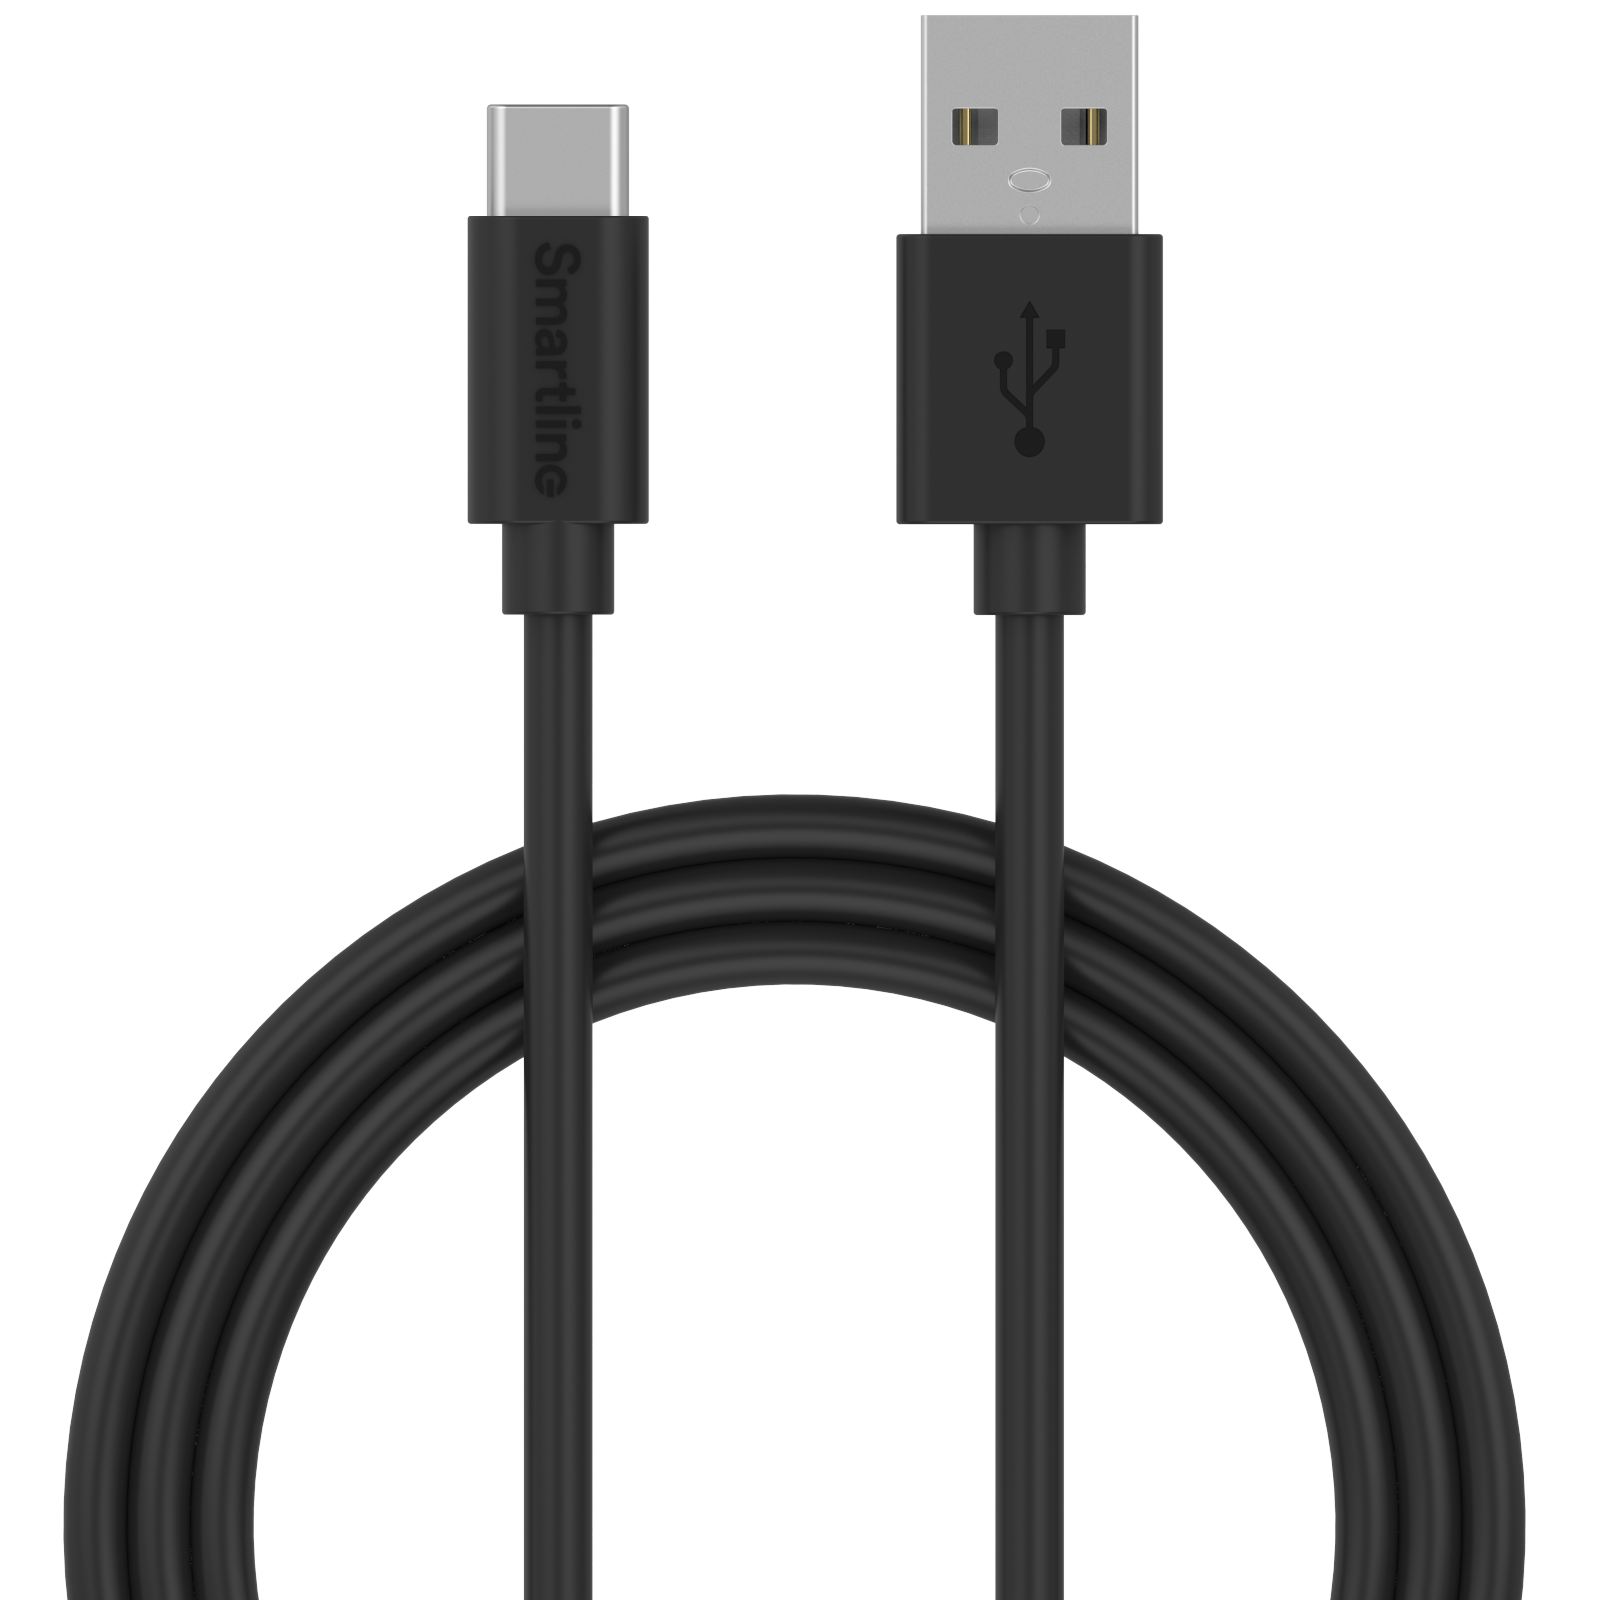 USB-A to USB-C Cable 3 meters Black